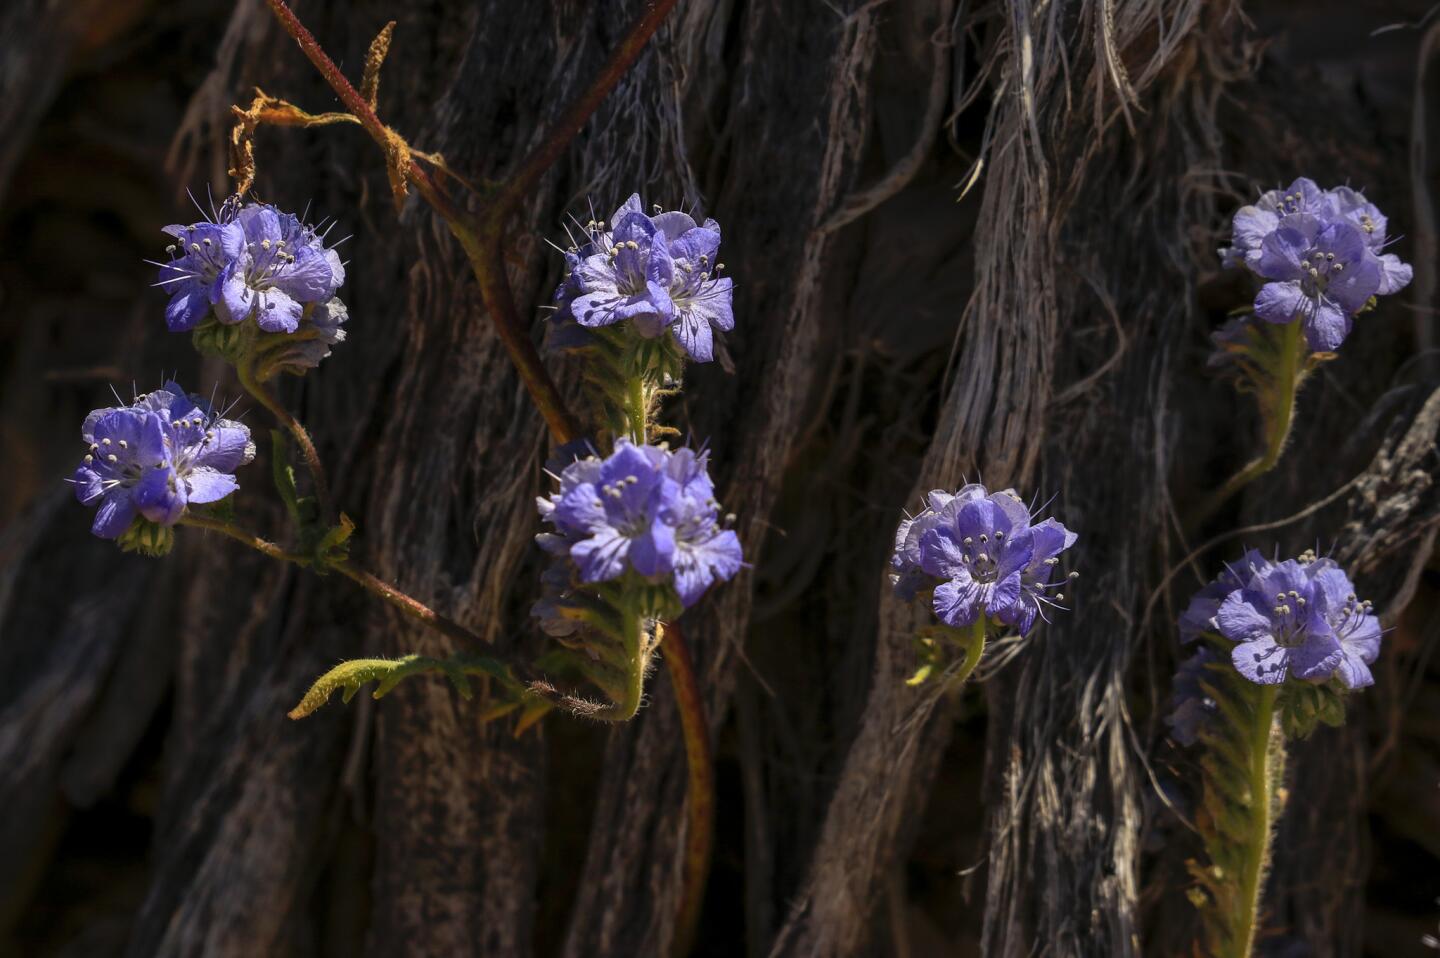 JOSHUA TREE NATIONAL PARK ,CA., APRIL 6, 2019: After a long wet winter the wildflowers like these blue phacelia (A.K.A Blue Curls) are blooming in a dead yucca plant in Joshua Tree National Park with a great show of color that is attracting visitors to this unique high desert destination April 6, 2019 (Mark Boster For the LA Times).